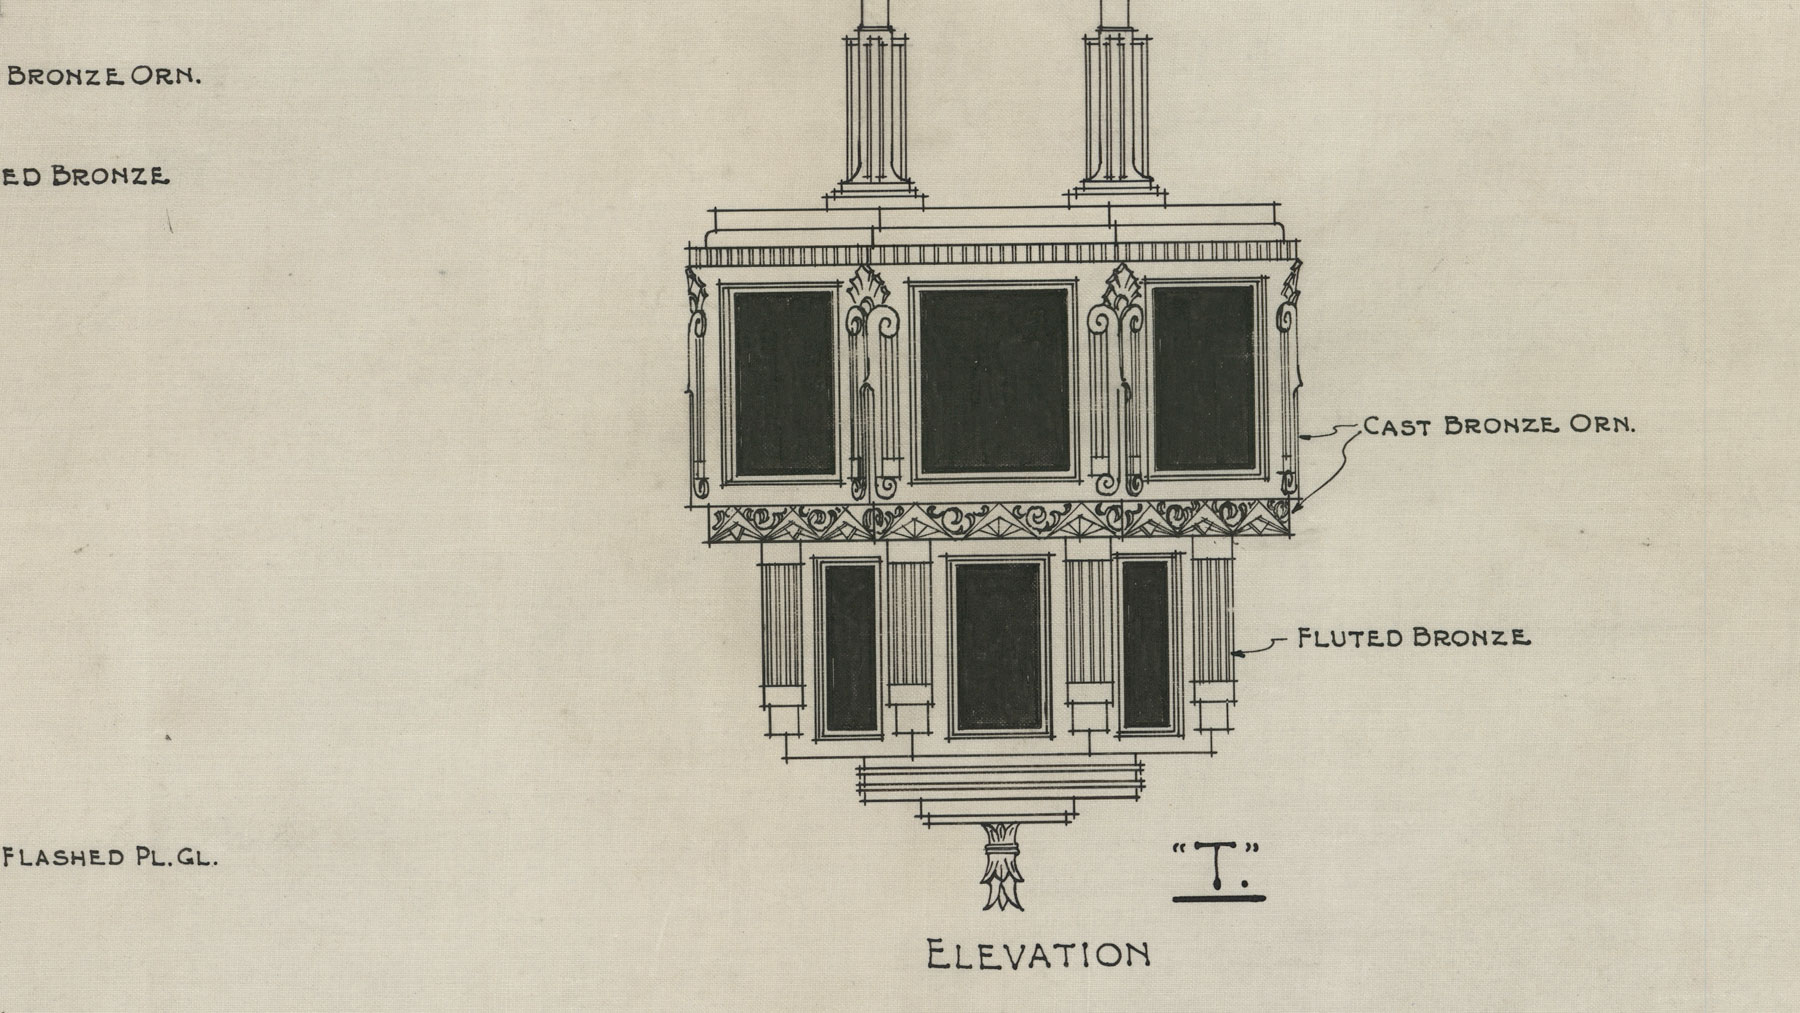 The Dominion Public Building: The Architectural Drawings - Lighting Fixtures